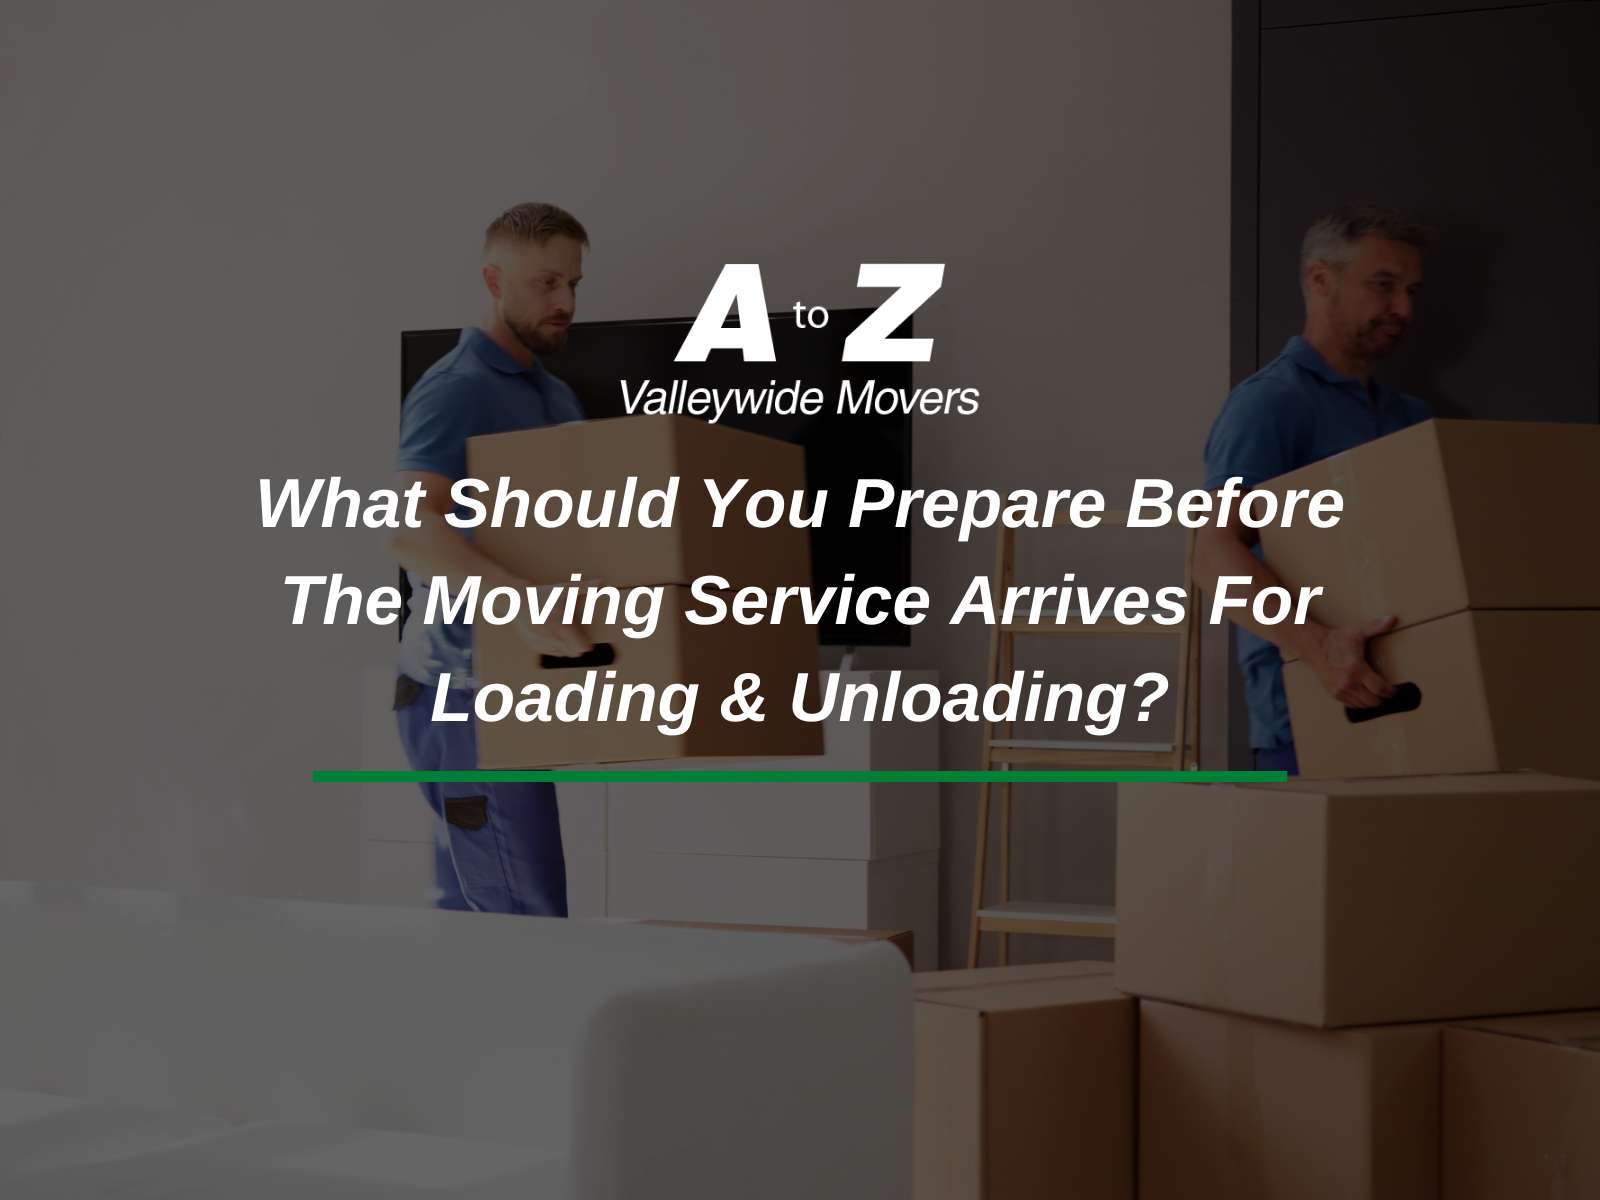 What Should You Prepare Before The Moving Service Arrives For Loading & Unloading